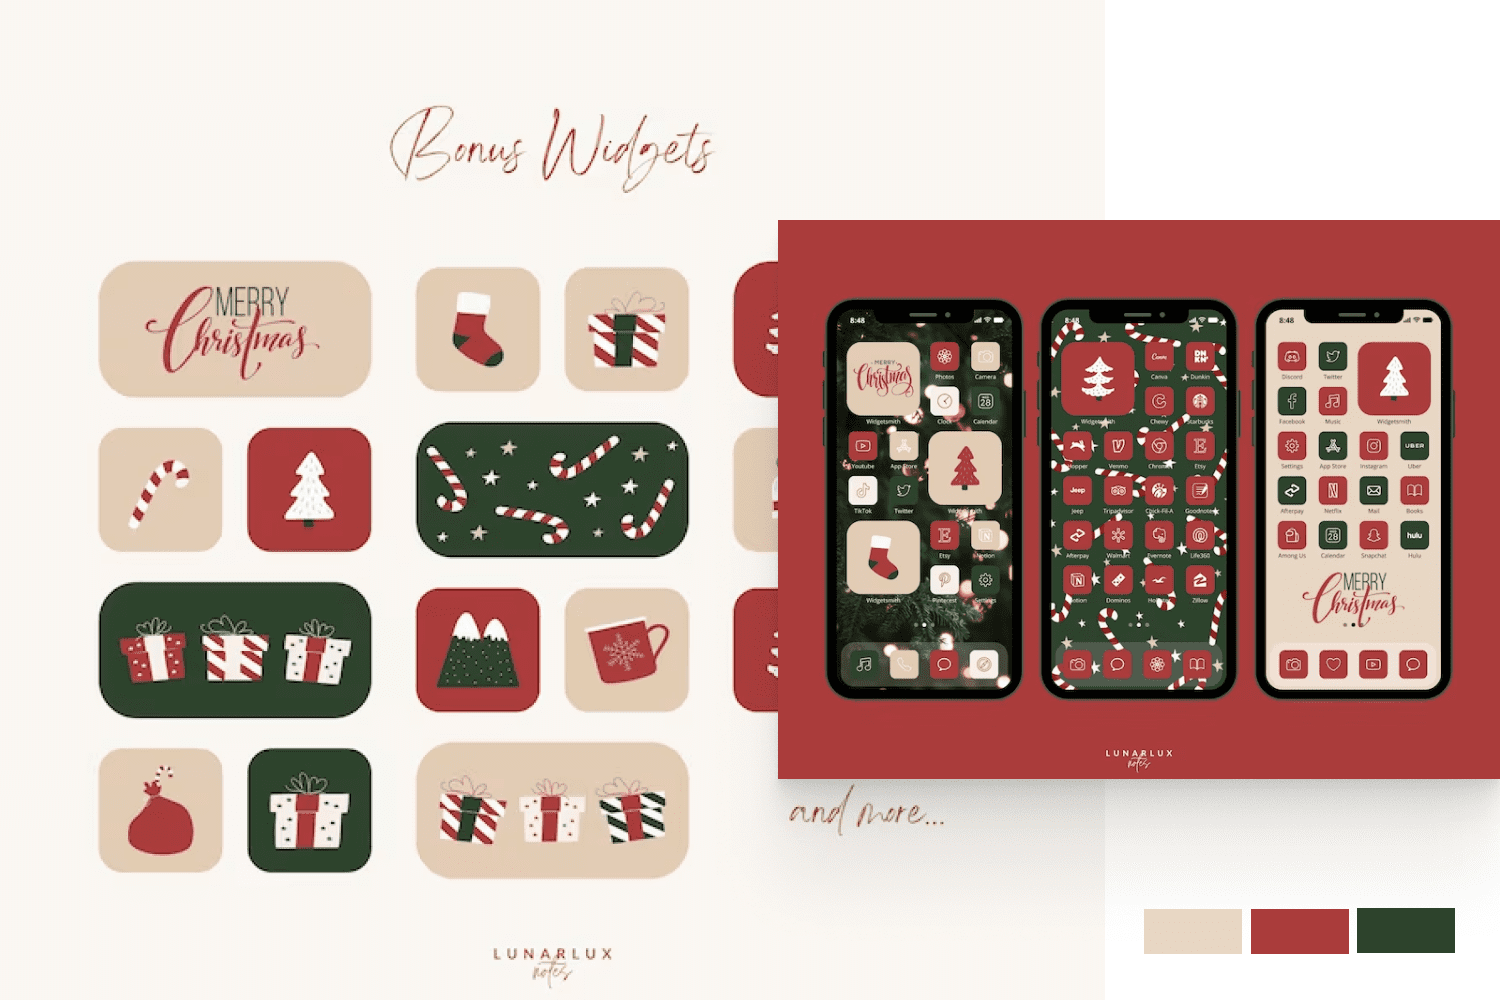 A collage of Christmas themed icons in green, red, white and beige colors.